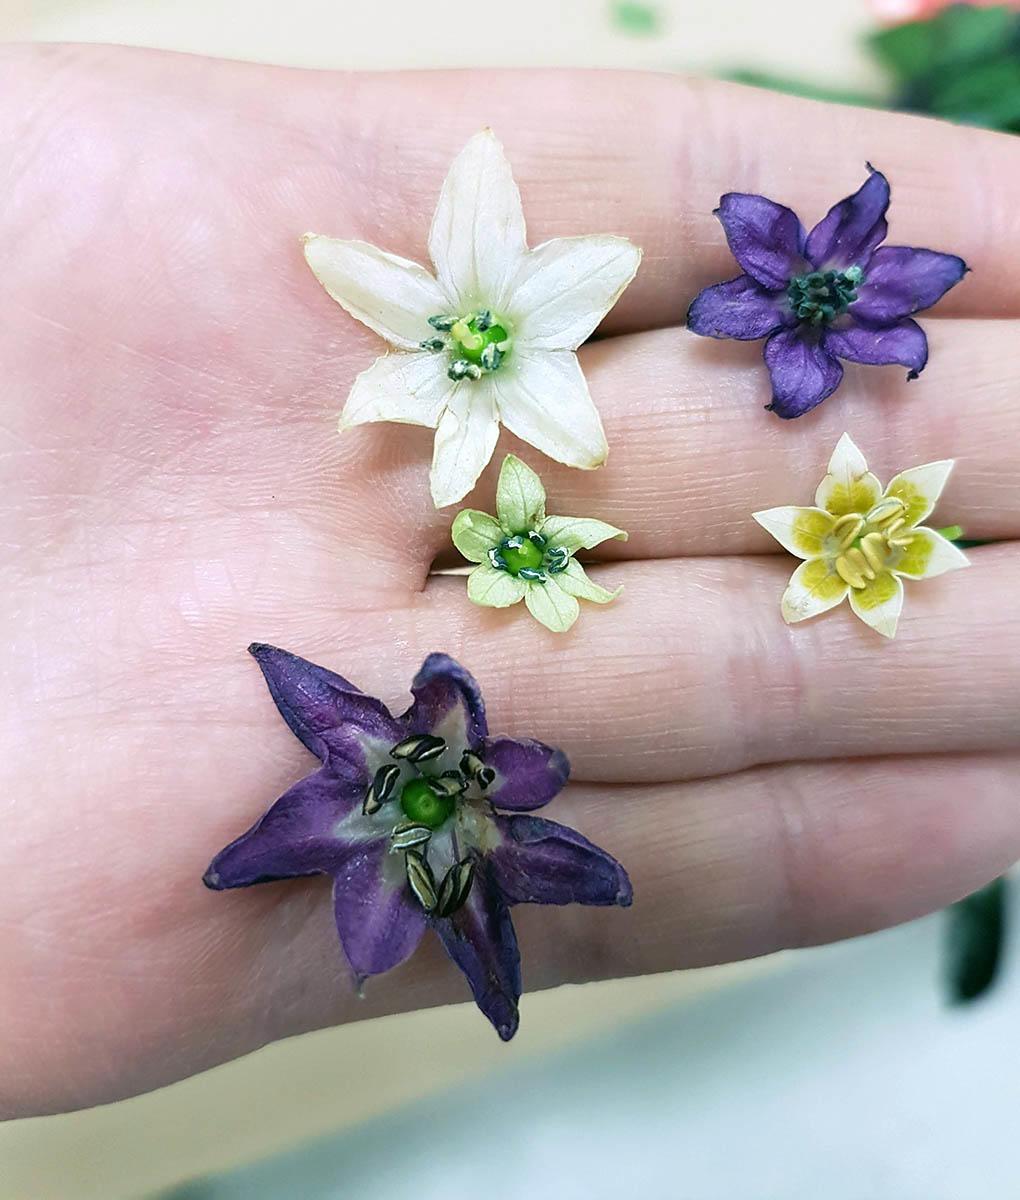 small star-shaped flowers in palm, two purple and three white